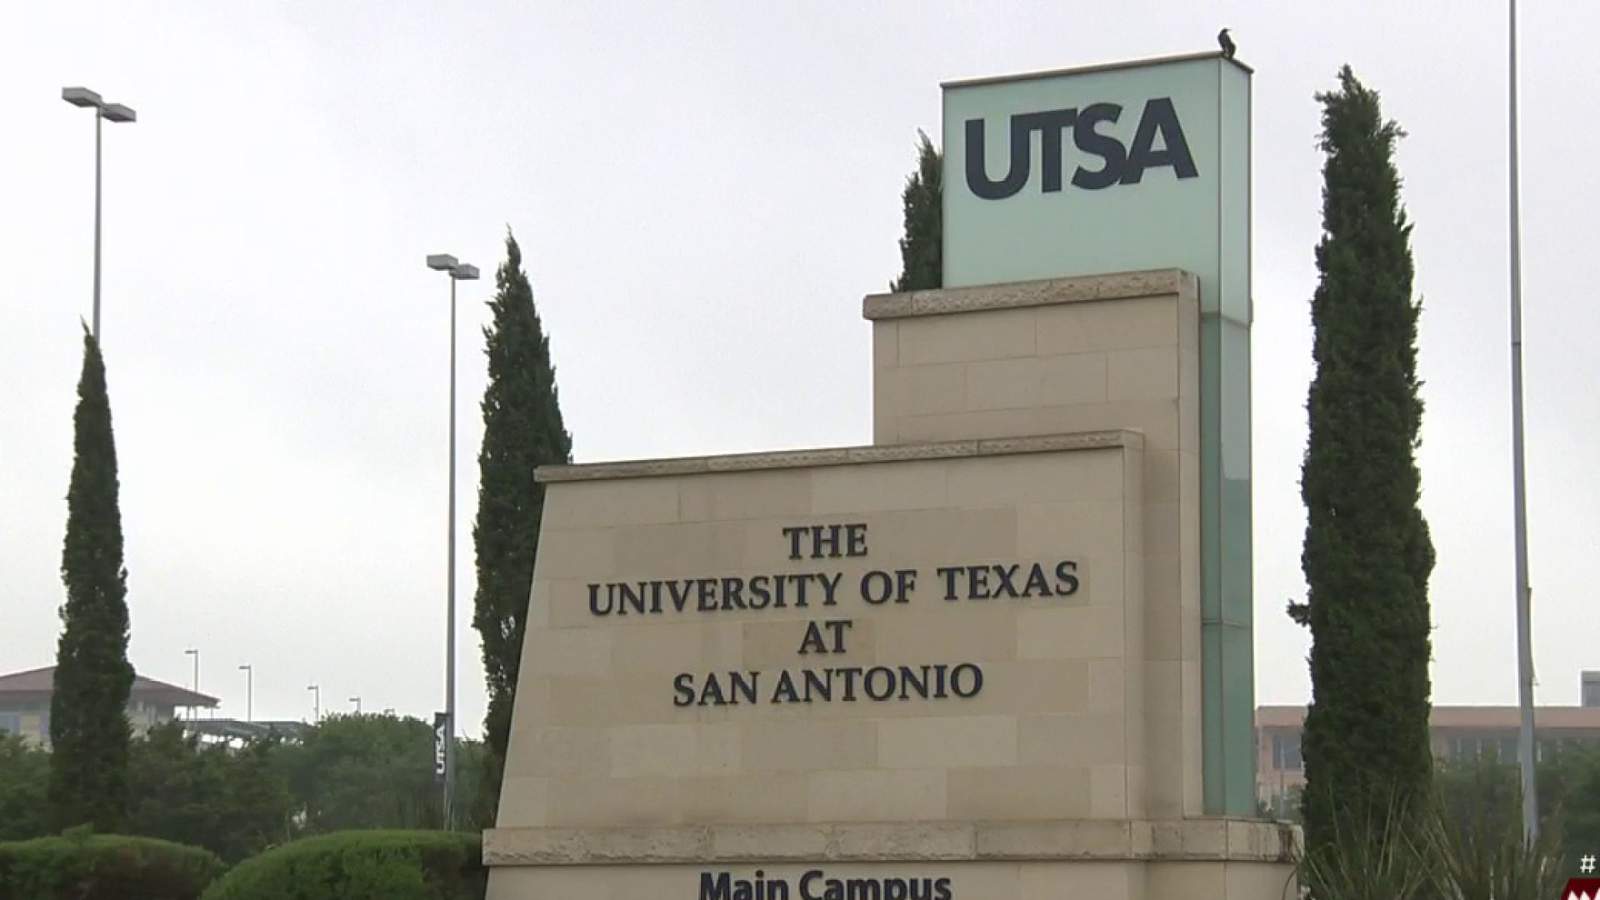 New book club at UTSA to focus on issues of race, race relations and racial justice